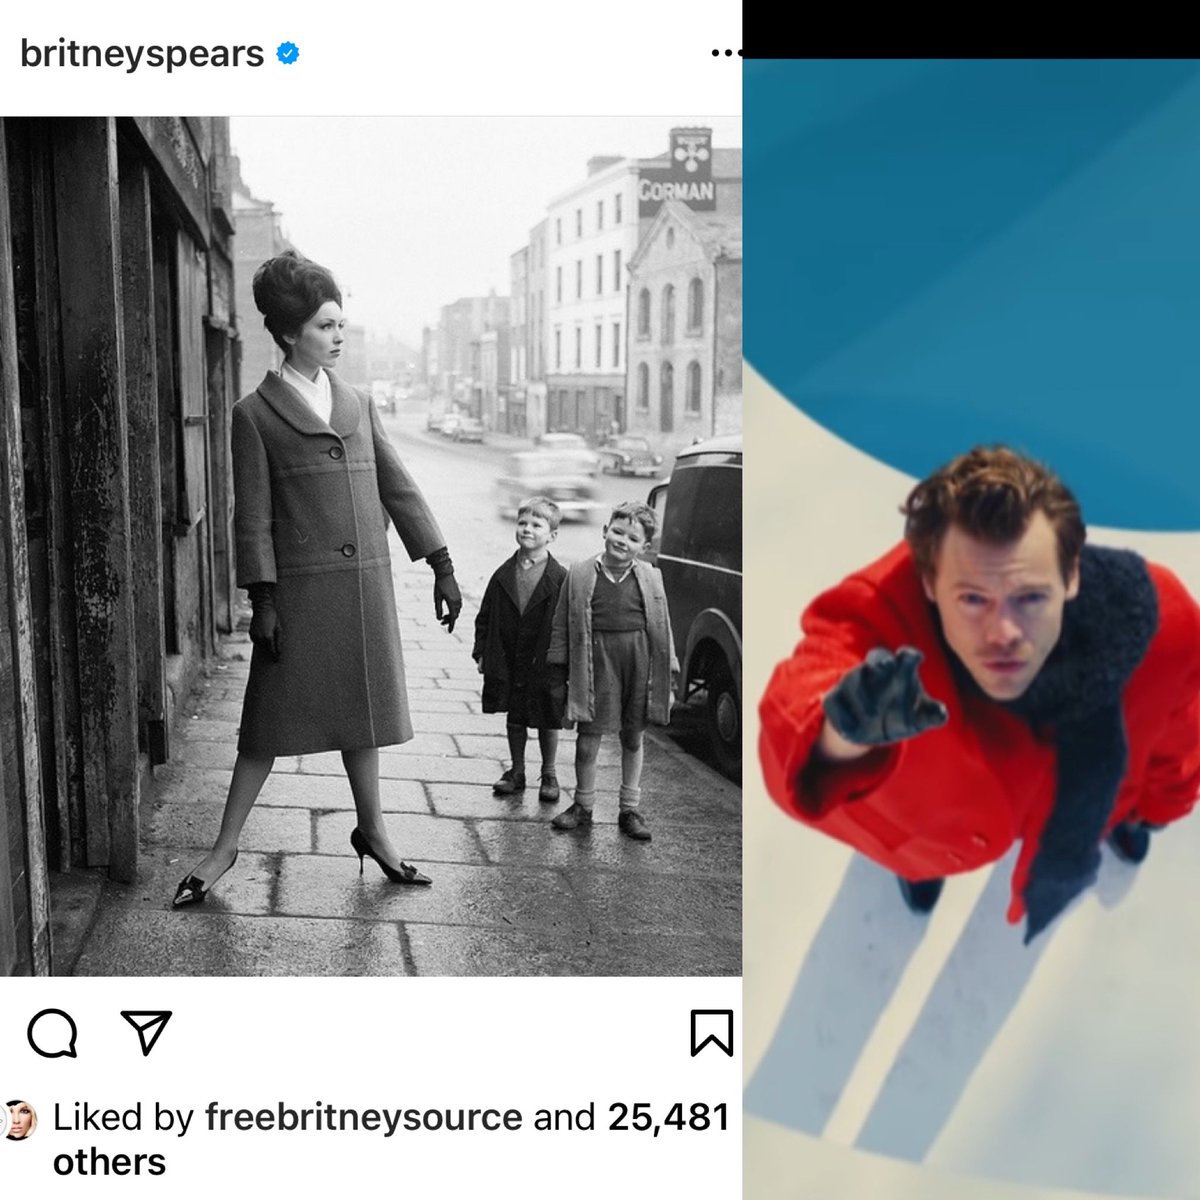 So @britneyspears just posted this & I 💕circumstantial evidence 

🎶 leave America 2 kids follow her - I don’t want to talk about who’s doing it first🎶 

📸🇺🇸 model Linda Ward in Dublin, c. 1960 by Colman Doyle

#HarryStyles #AIW #AliceInWonderland #JusticeForBritney https://t.co/lCPtNKUTHN.